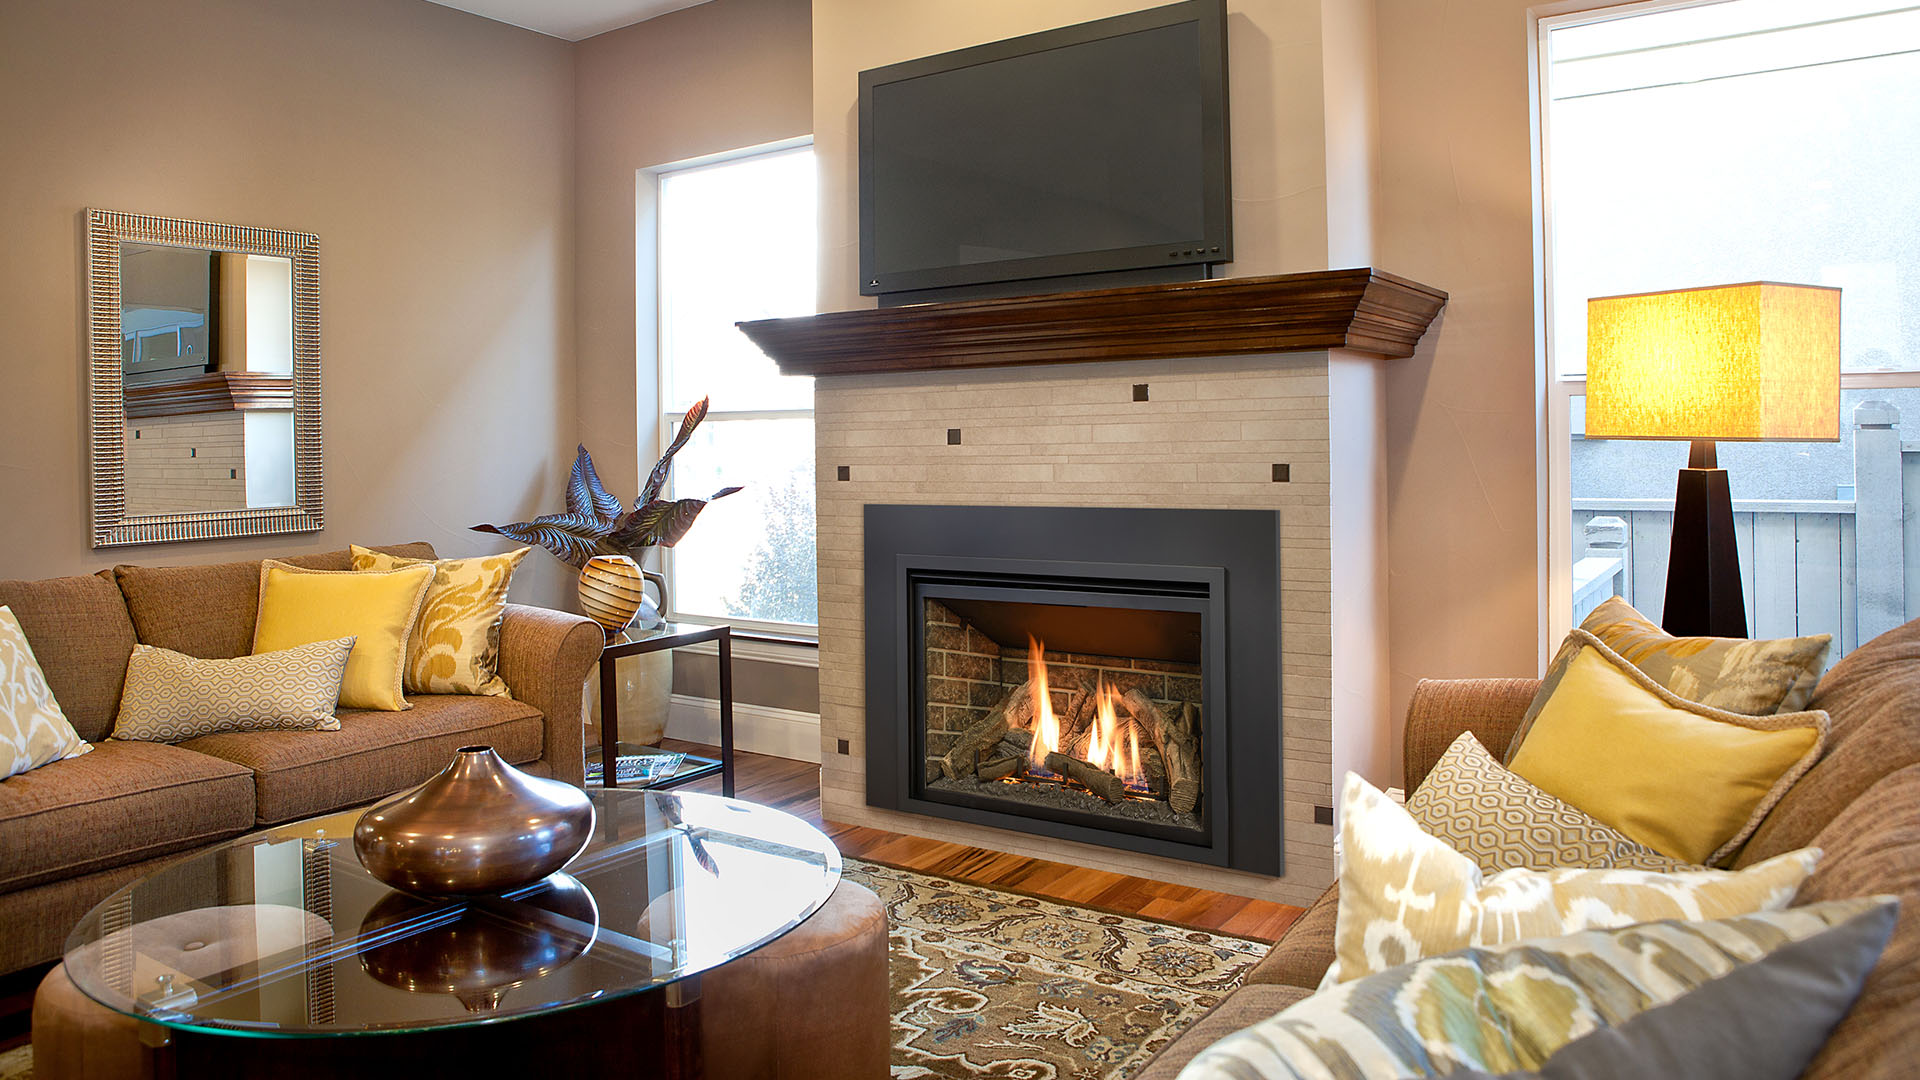 Gas Stove and Fireplace Education Archives - Hot Tubs, Fireplaces